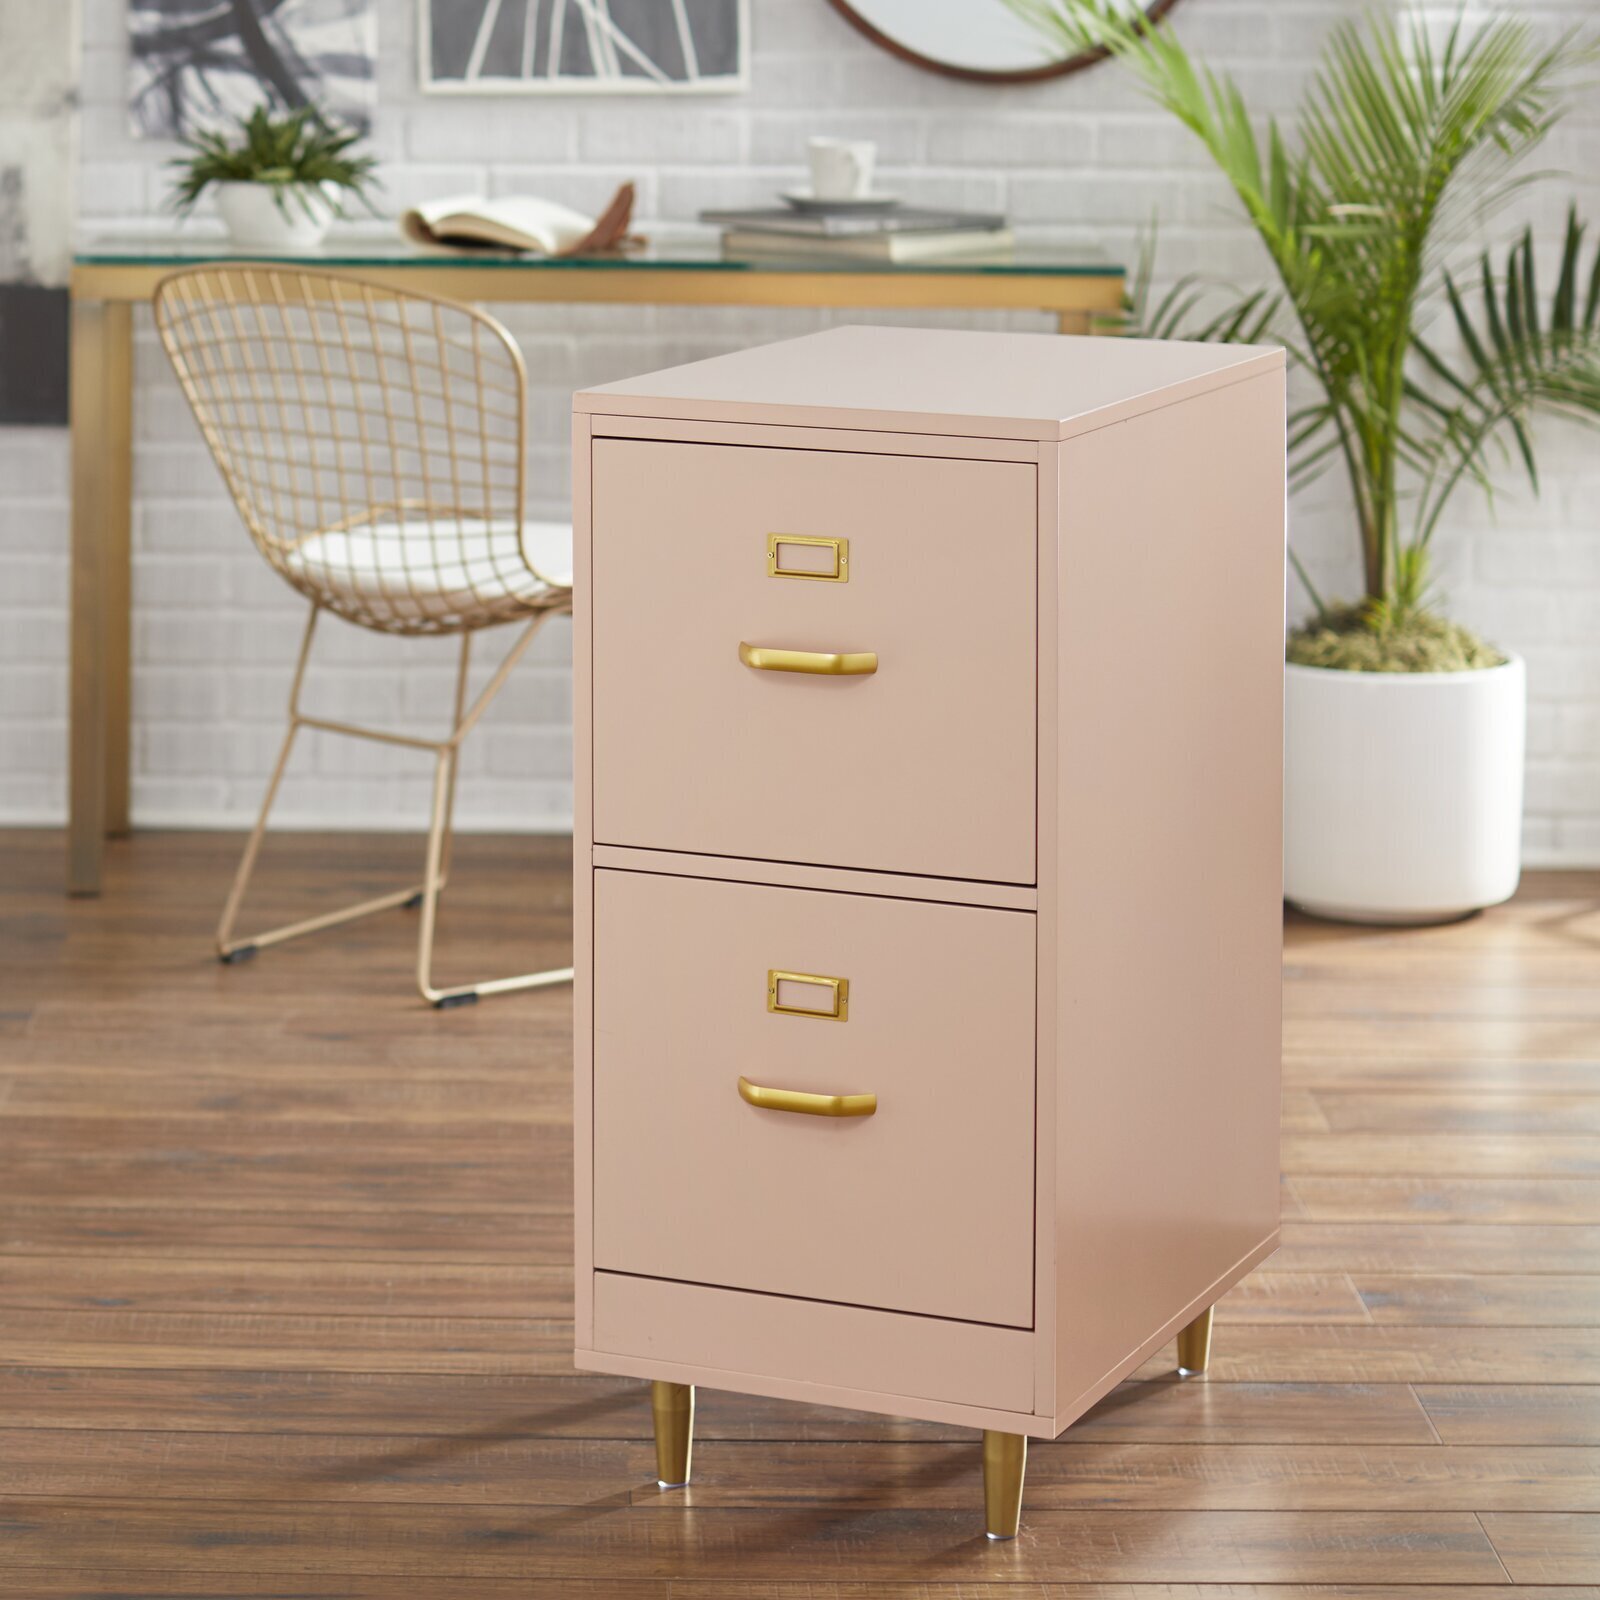 Compact Cute Filing Cabinet